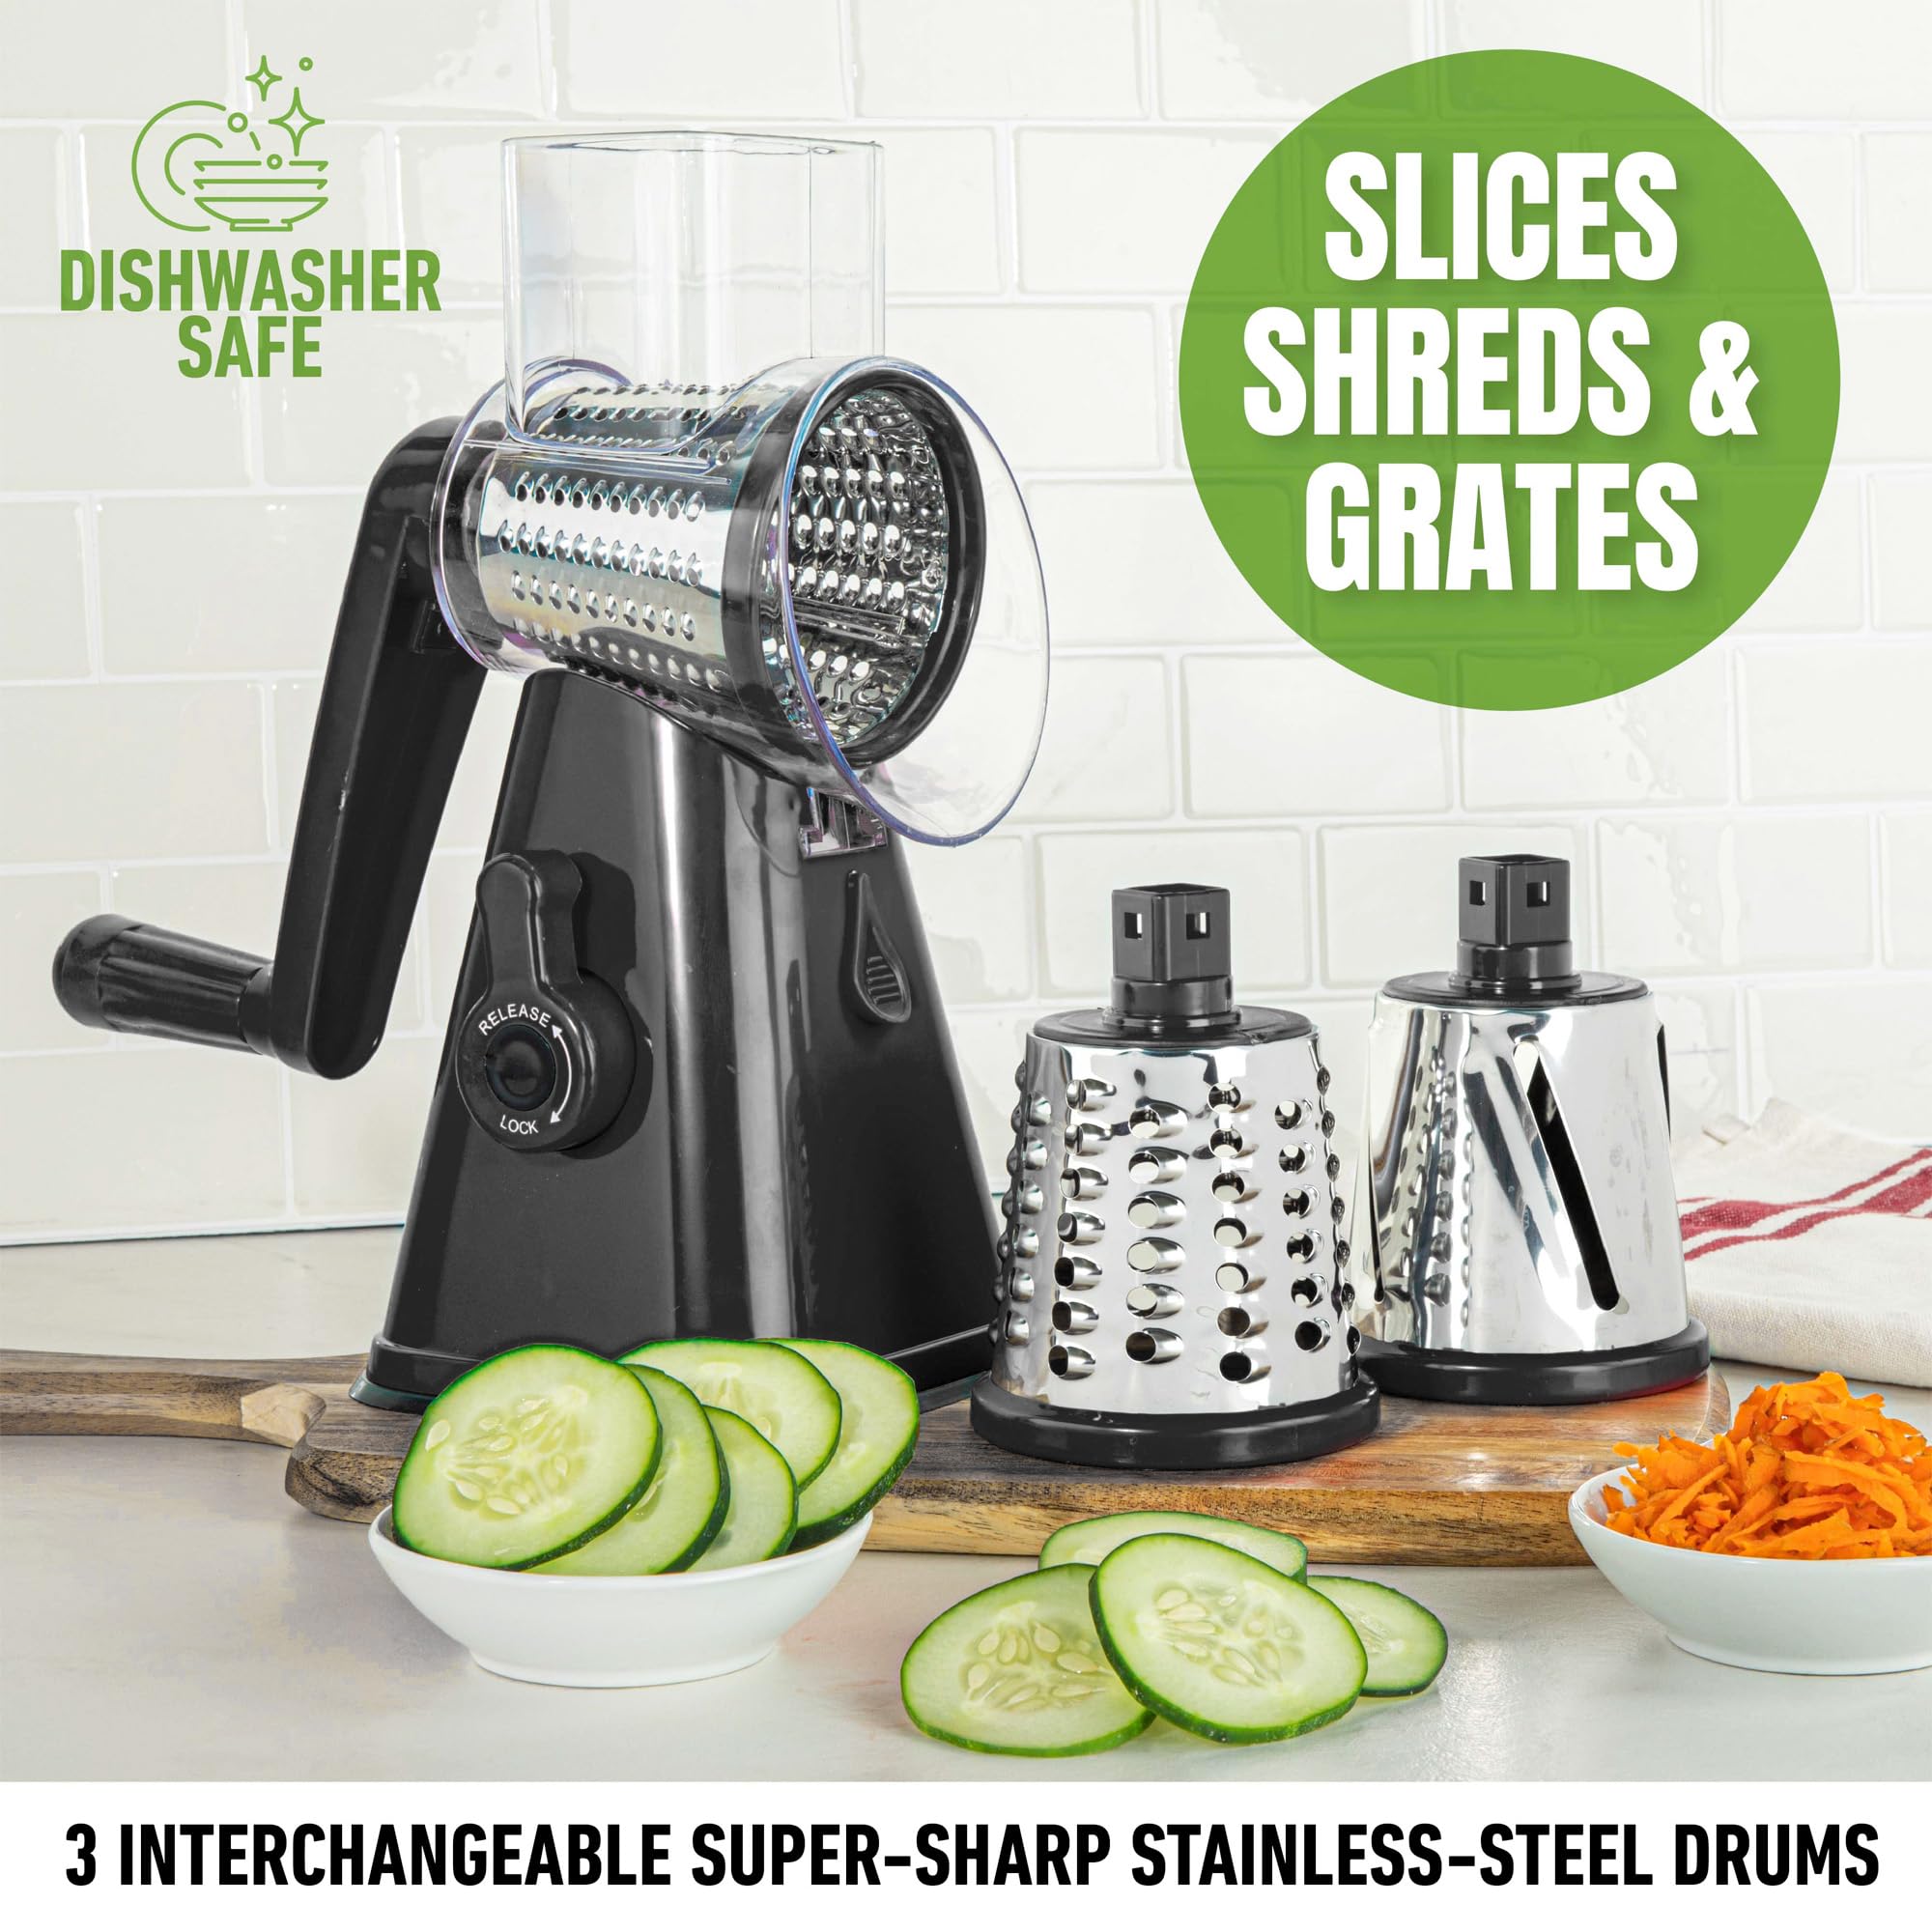 Rotary Cheese Grater with Handle, Cheese Grater Hand Crank, Fast Cutting Grater for Kitchen with 3 Interchangeable Blades, Vegetable Slicer, Cheese Shredder with Suction Cup Base, Dishwasher Safe